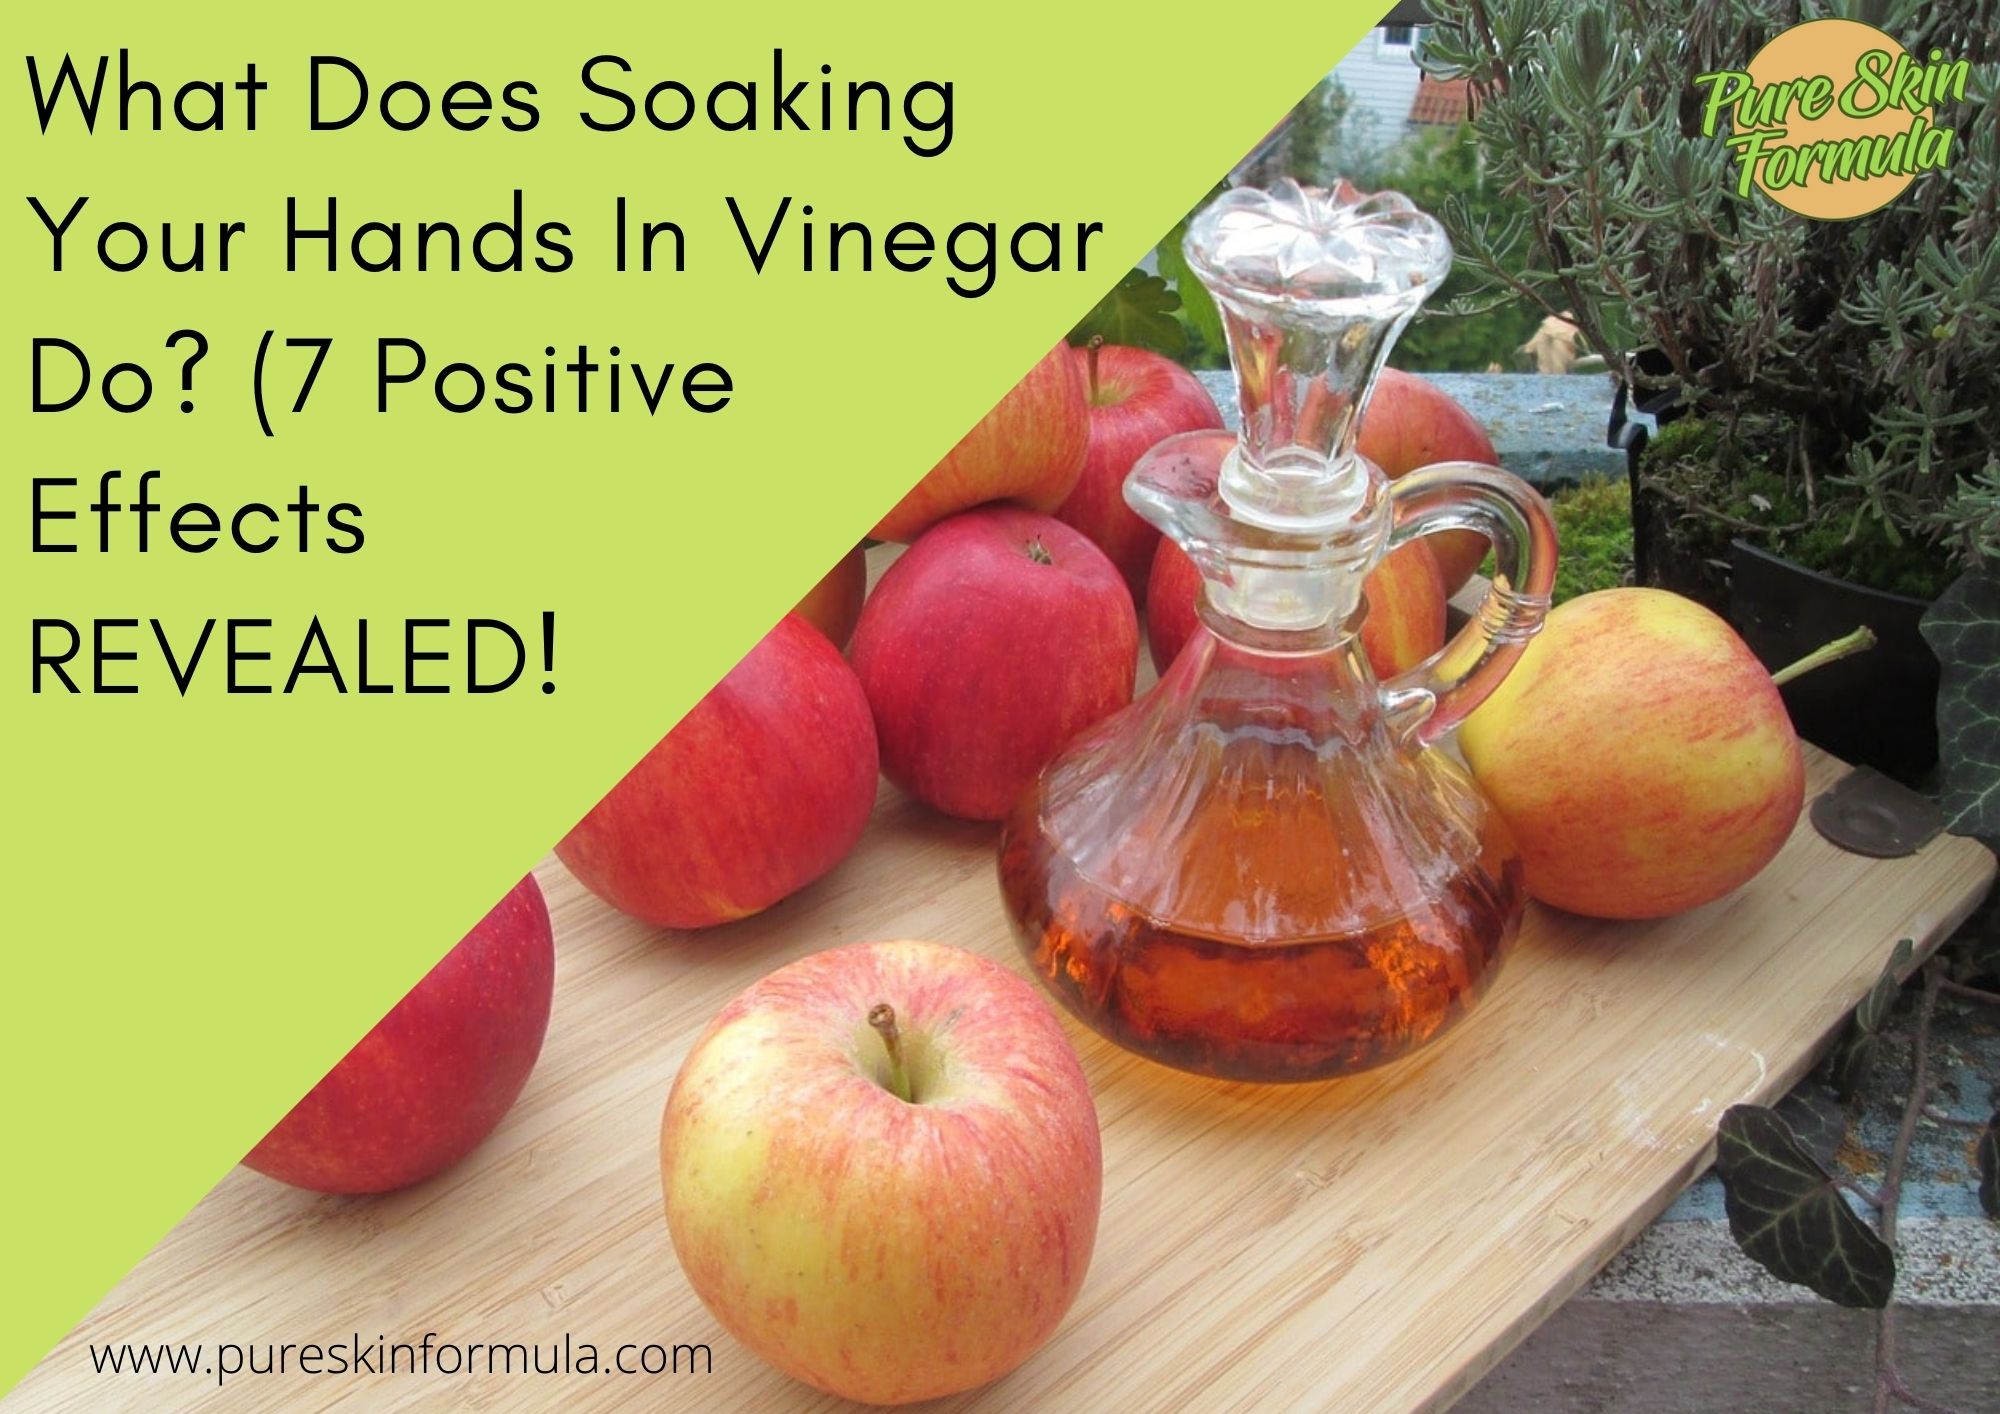 What Does Soaking Your Hands In Vinegar Do